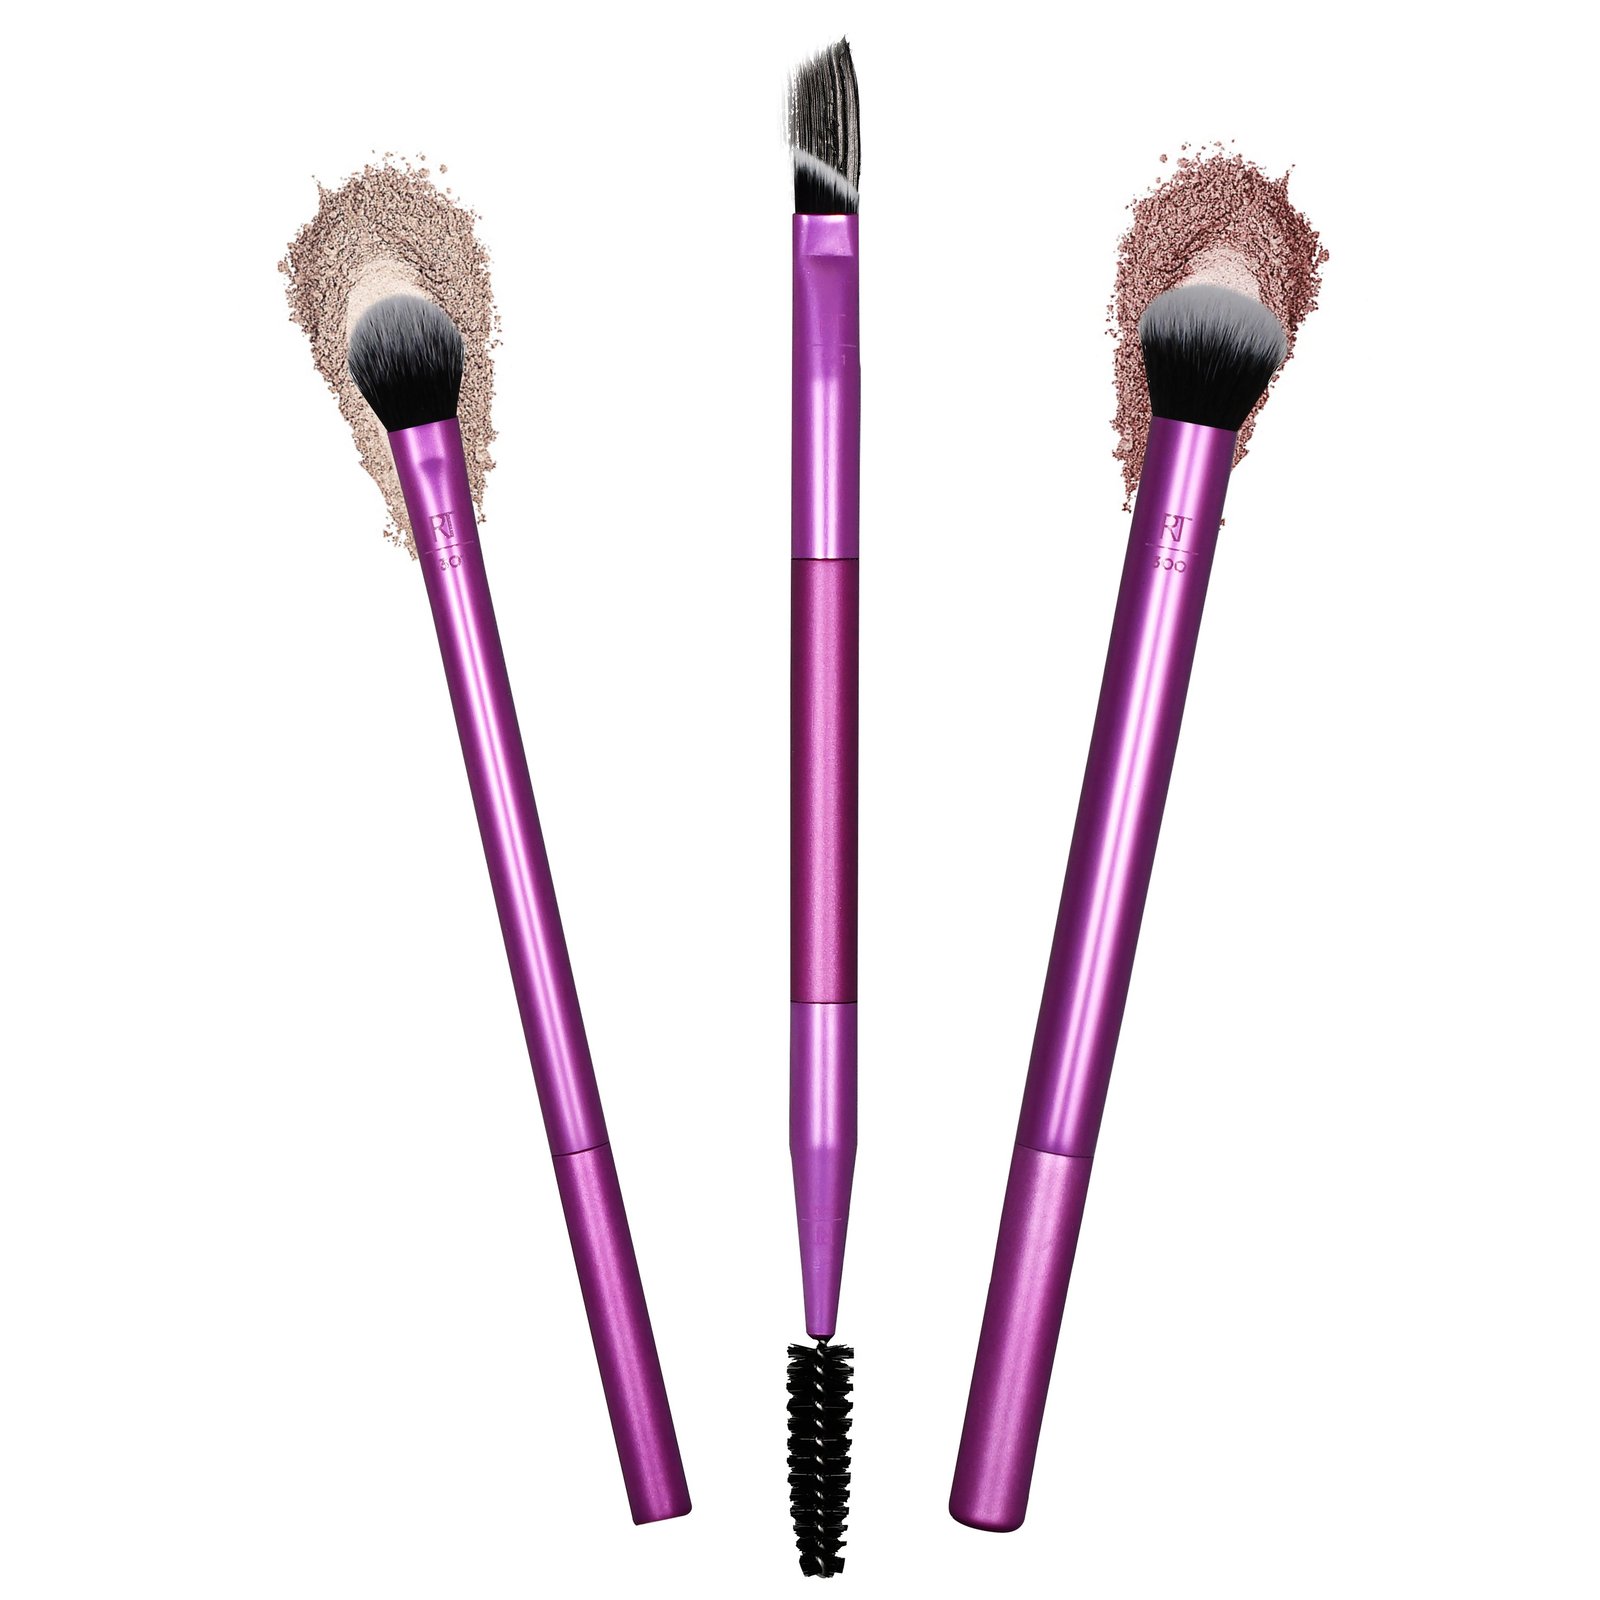 REAL TECHNIQUES Eye Shade & Blend Brushes 1 set